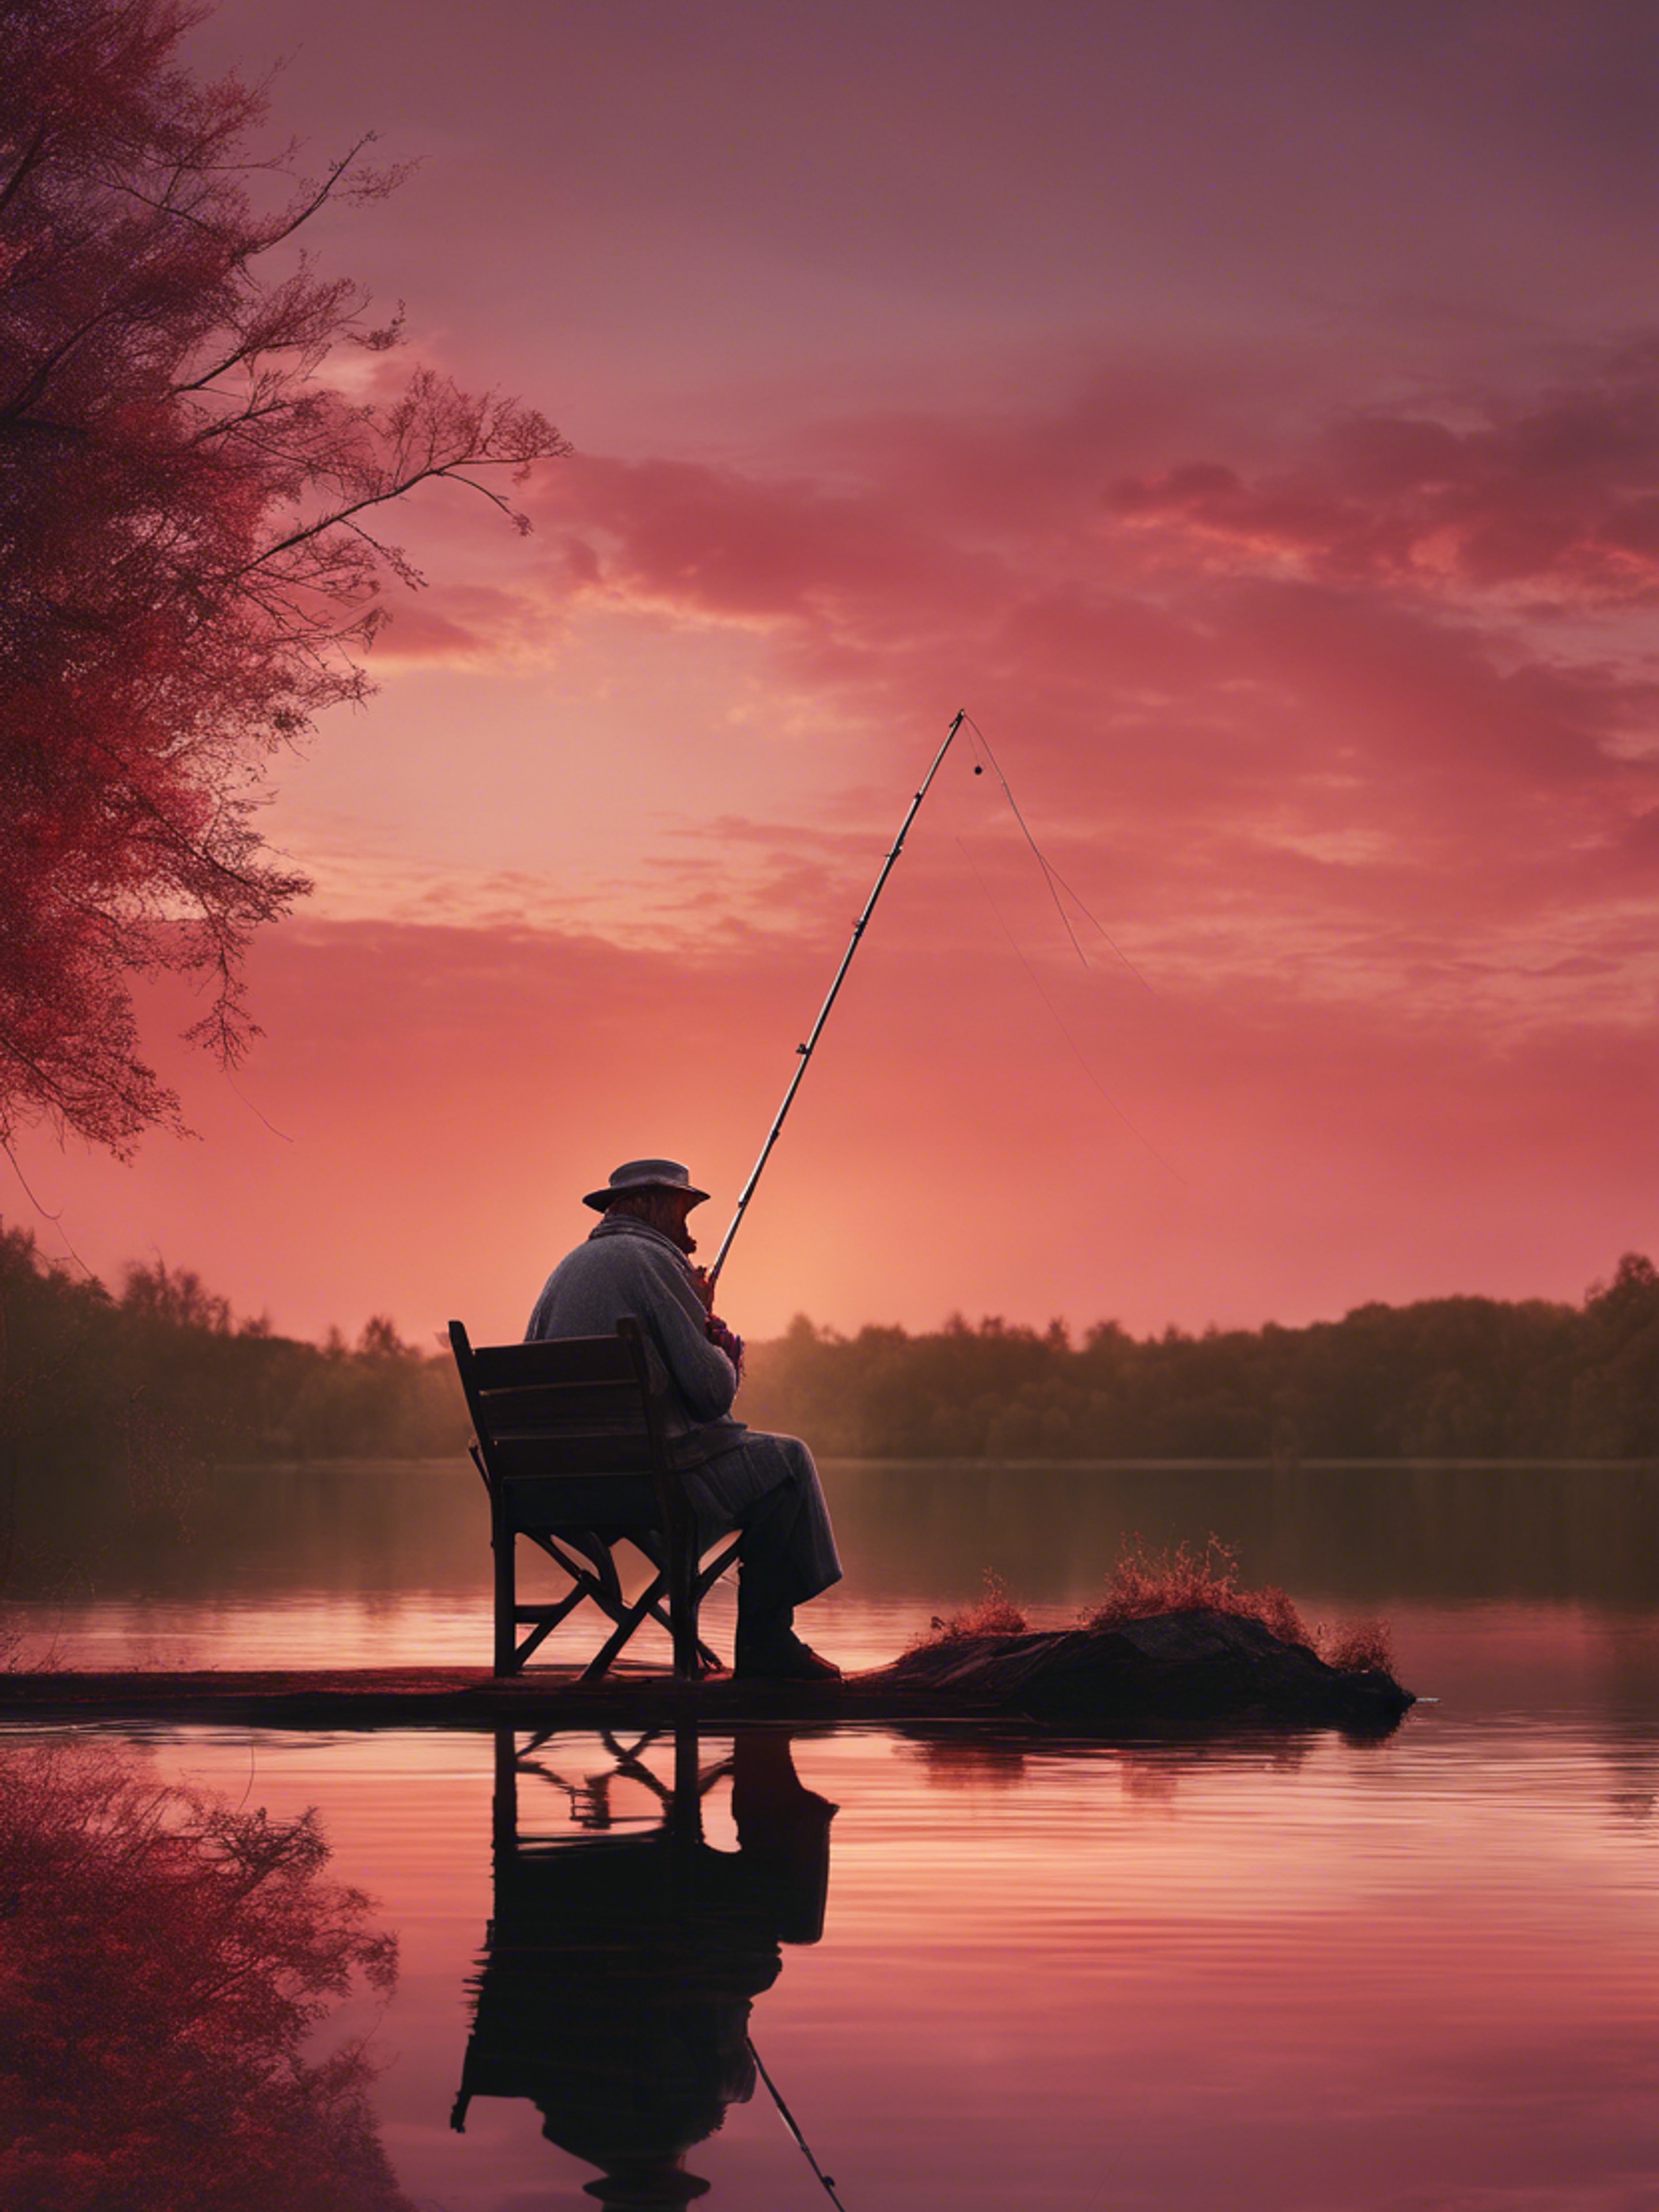 An old man maintaining a lonely vigil beside a lake under a ruby-red sunset, a fishing rod in his hand. Hình nền[4b1db37a85dd45b294cb]